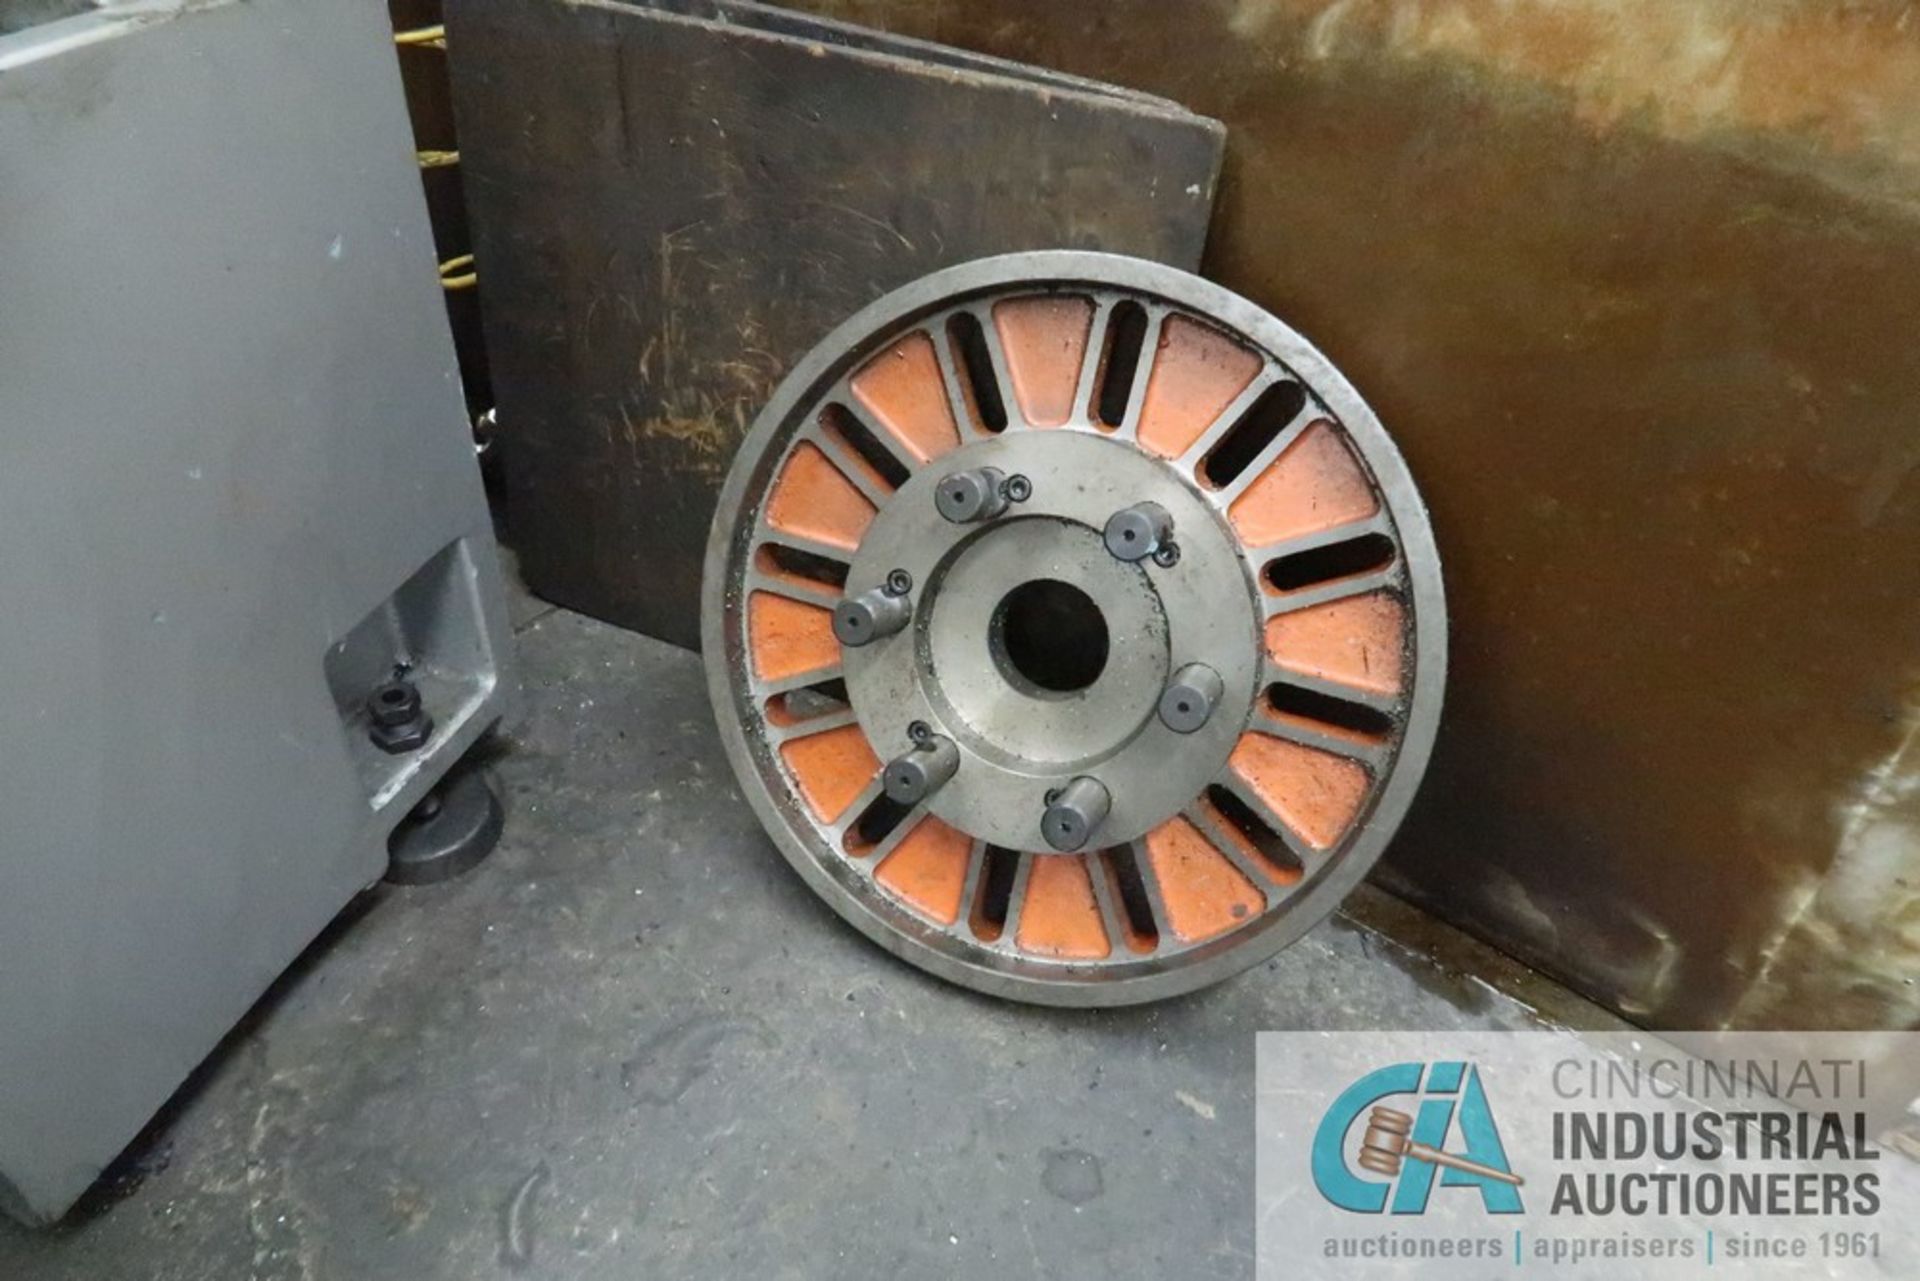 18" X 60" SHARP MODEL 1860L ENGINE LATHE; S/N 5011216, 3" SPINDLE HOLE, 15" 4-JAW CHUCK, - Image 9 of 10